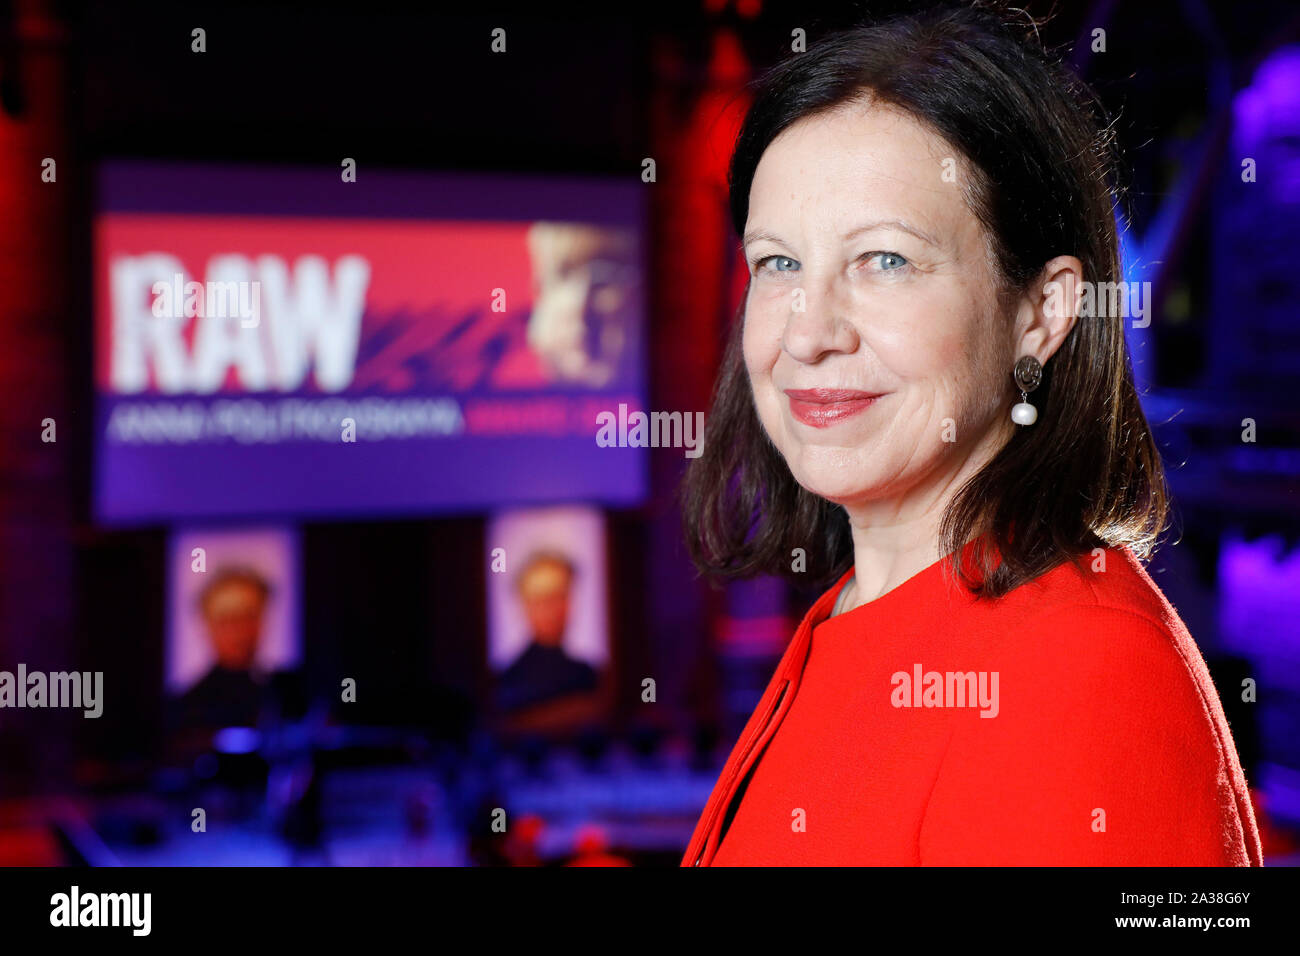 London, UK. 5th Oct, 2019. BBC journalist Lyse Doucet, poses before the RAW in WAR Anna Politkovskaya Award 2018 ceremony in London Saturday October 5. Alexievich received the award for speaking out about injustices in the post-Soviet space. The award in memory of journalist Anna Polikotkovskaya who was murdered in 2006 is presented annually, by the Reach All Women in WAR (RAW in WAR) charity to a female human rights defender from a conflict zone. Photograph Credit: Luke MacGregor/Alamy Live News Stock Photo